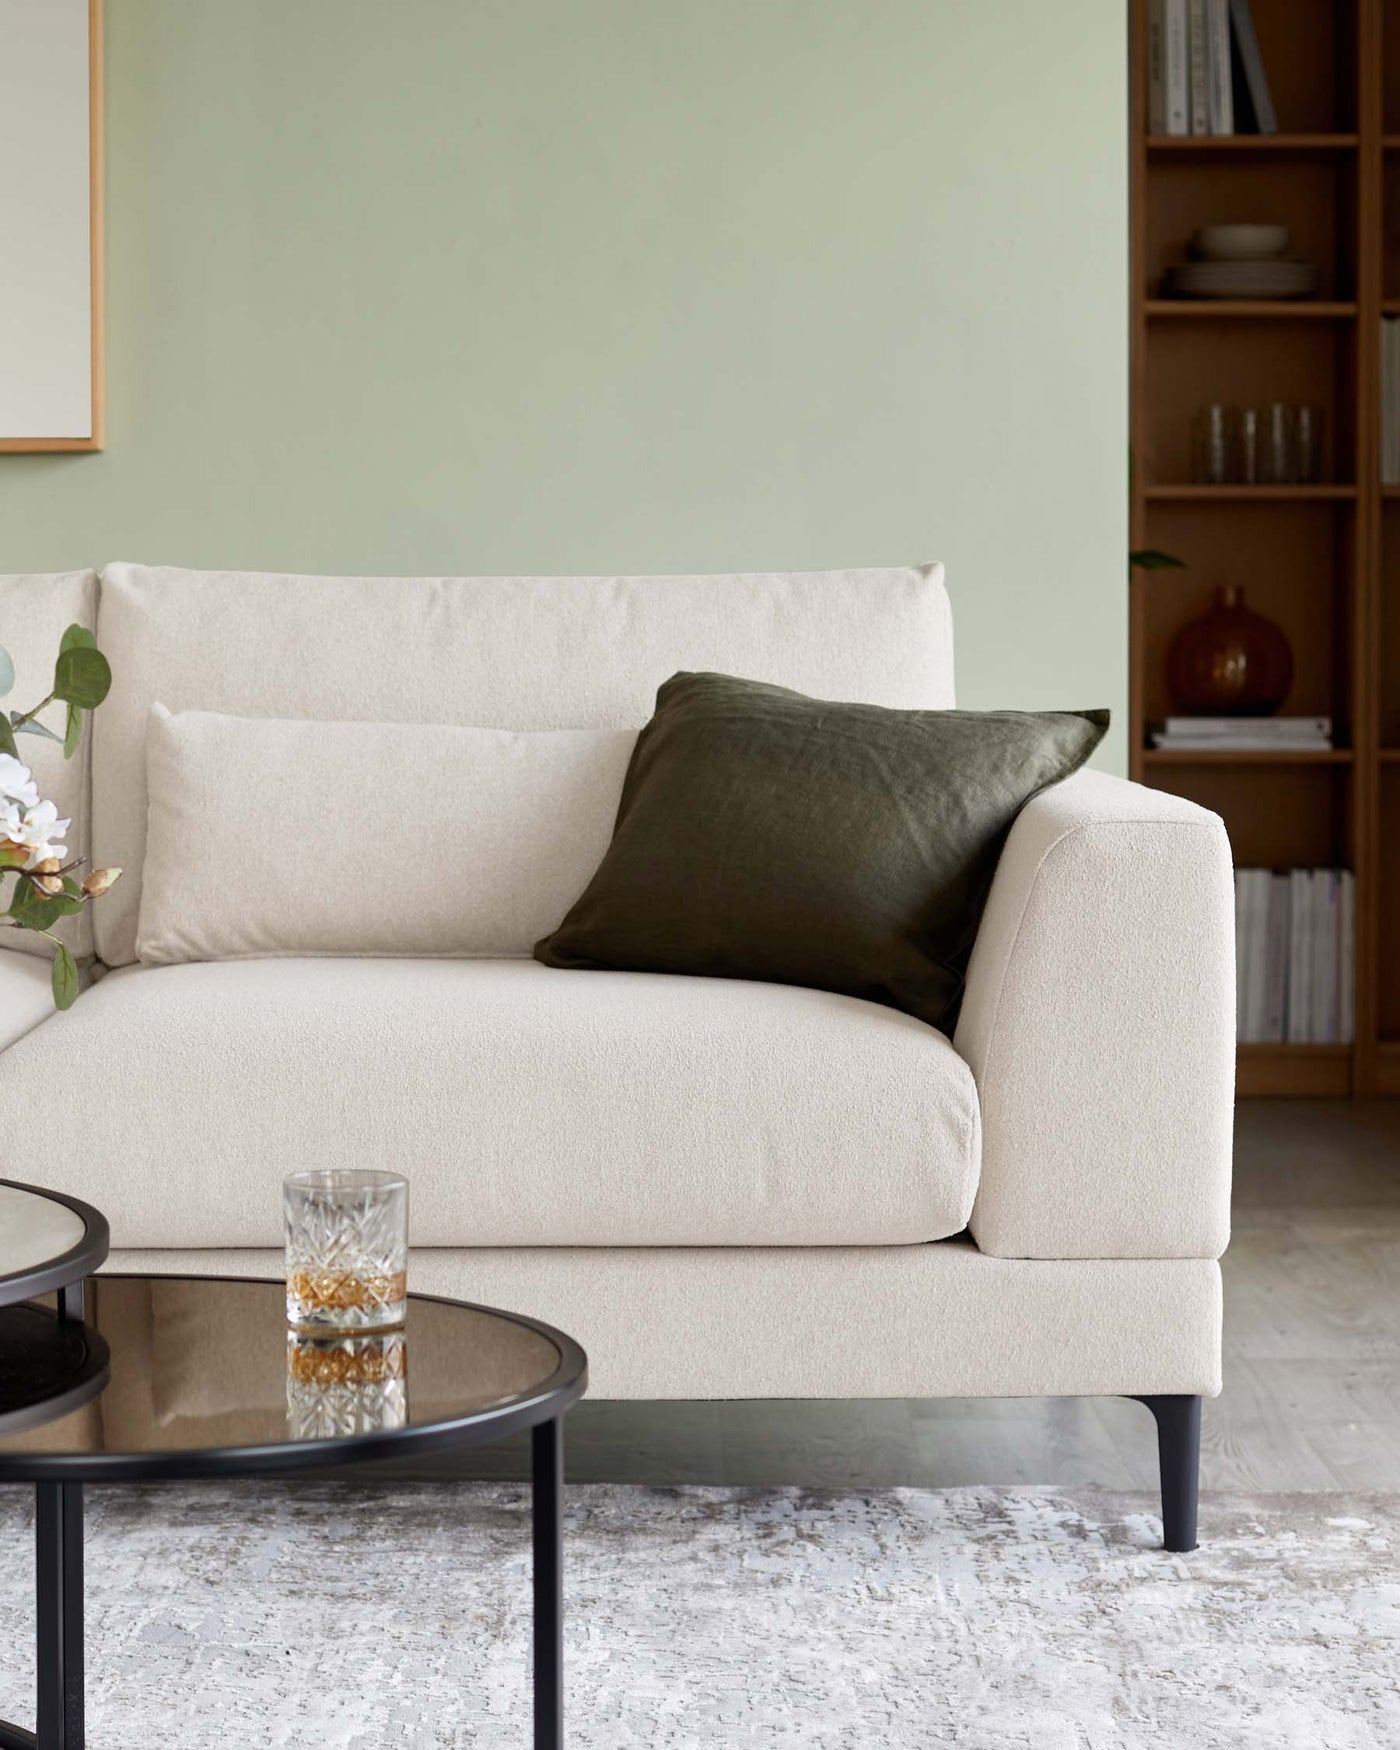 A contemporary beige three-seater sofa with clean lines and minimalistic design, featuring cushioned seats and backrest, and accompanied by a dark olive rectangular lumbar pillow. The sofa is positioned next to a round, black-framed coffee table with a glass top, all resting on a textured off-white area rug. In the background, there's a tall wooden bookshelf partially filled with books and decorative items against a light green wall.